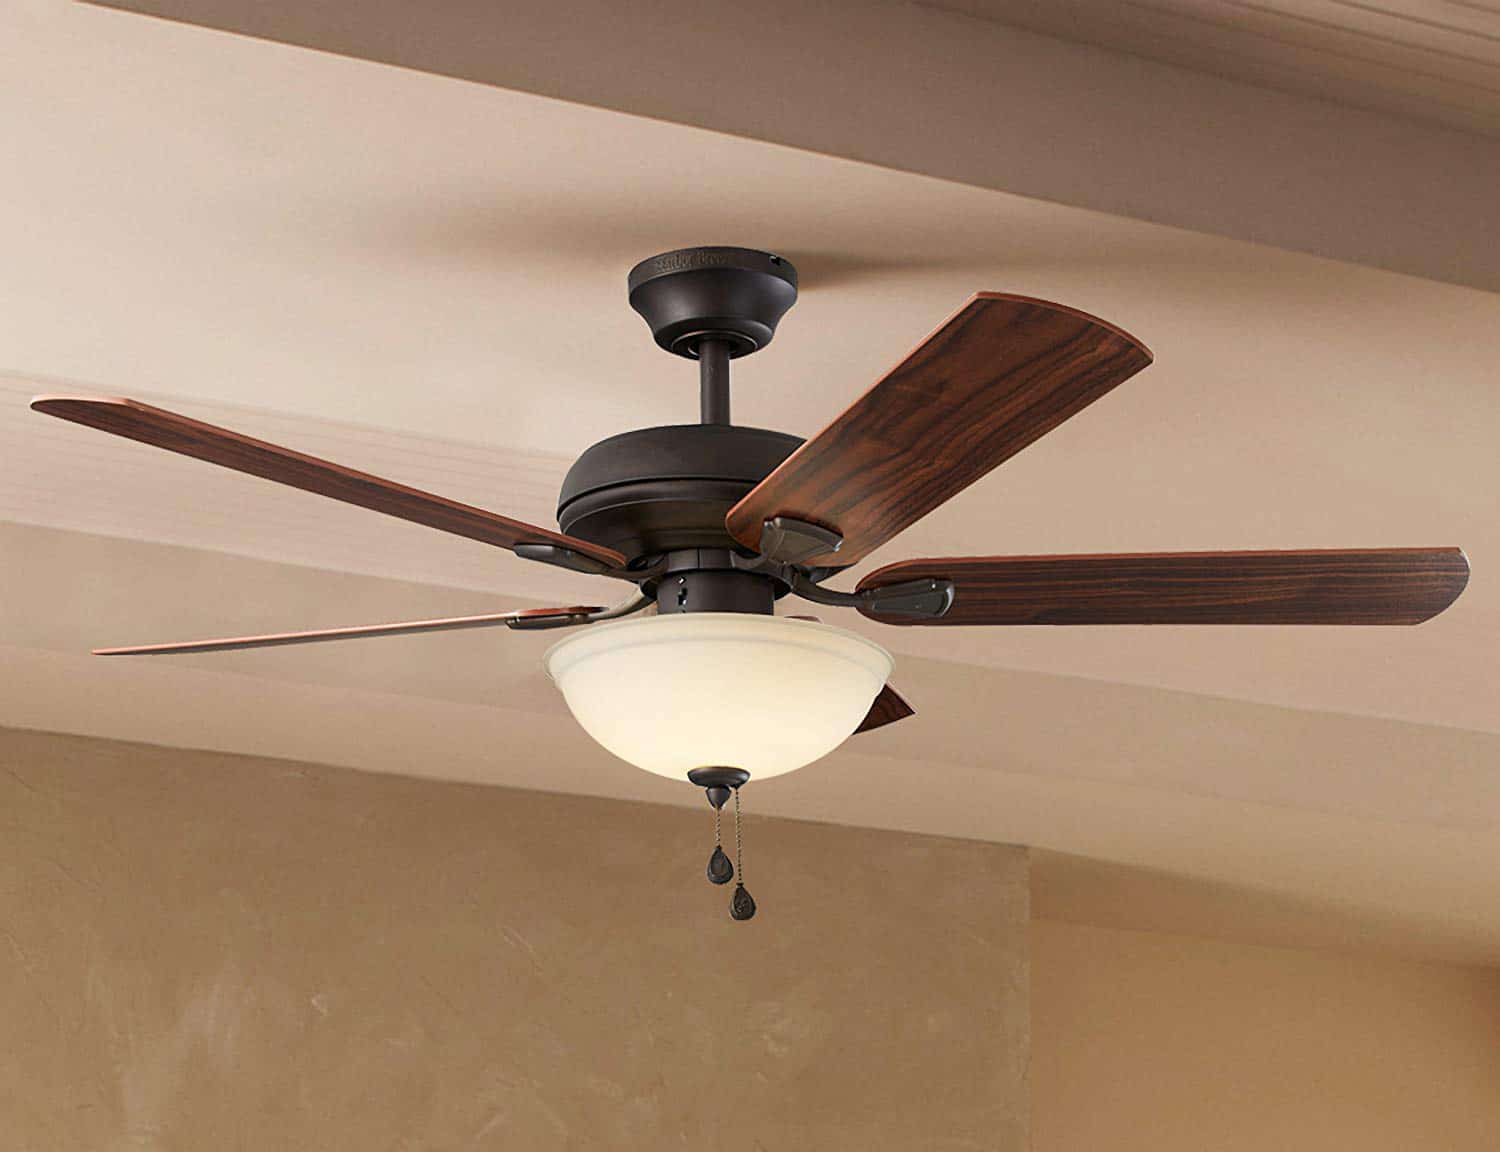 Top 10 Best Ceiling Fans In 2019 Reviews Buyer S Guide